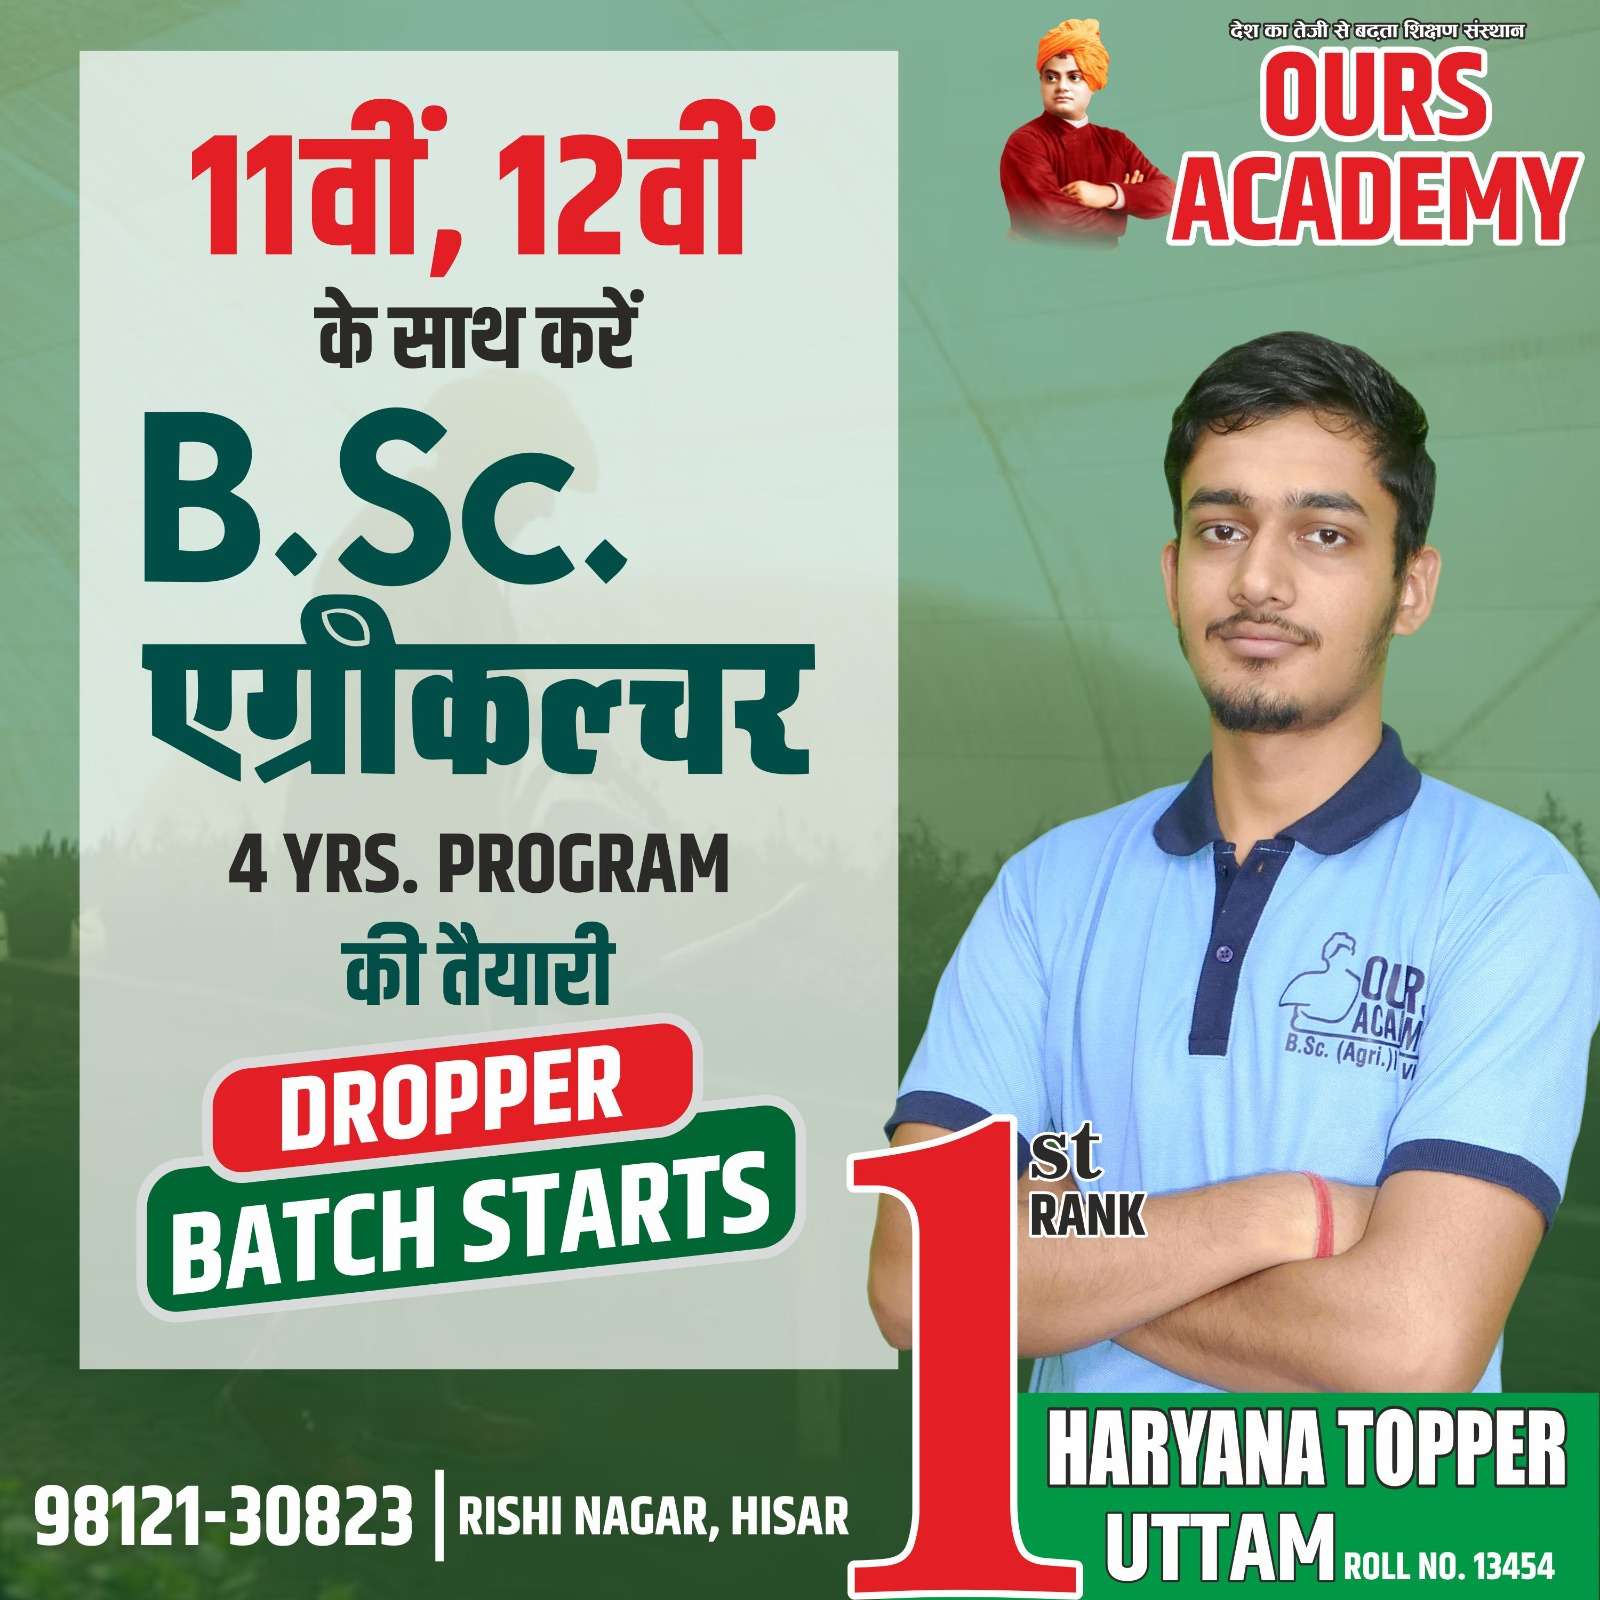  Best Agriculture Academy in Hisar: Your Path to BSc Agriculture 6-Year and 4-Year Programs at Haryana Agriculture University